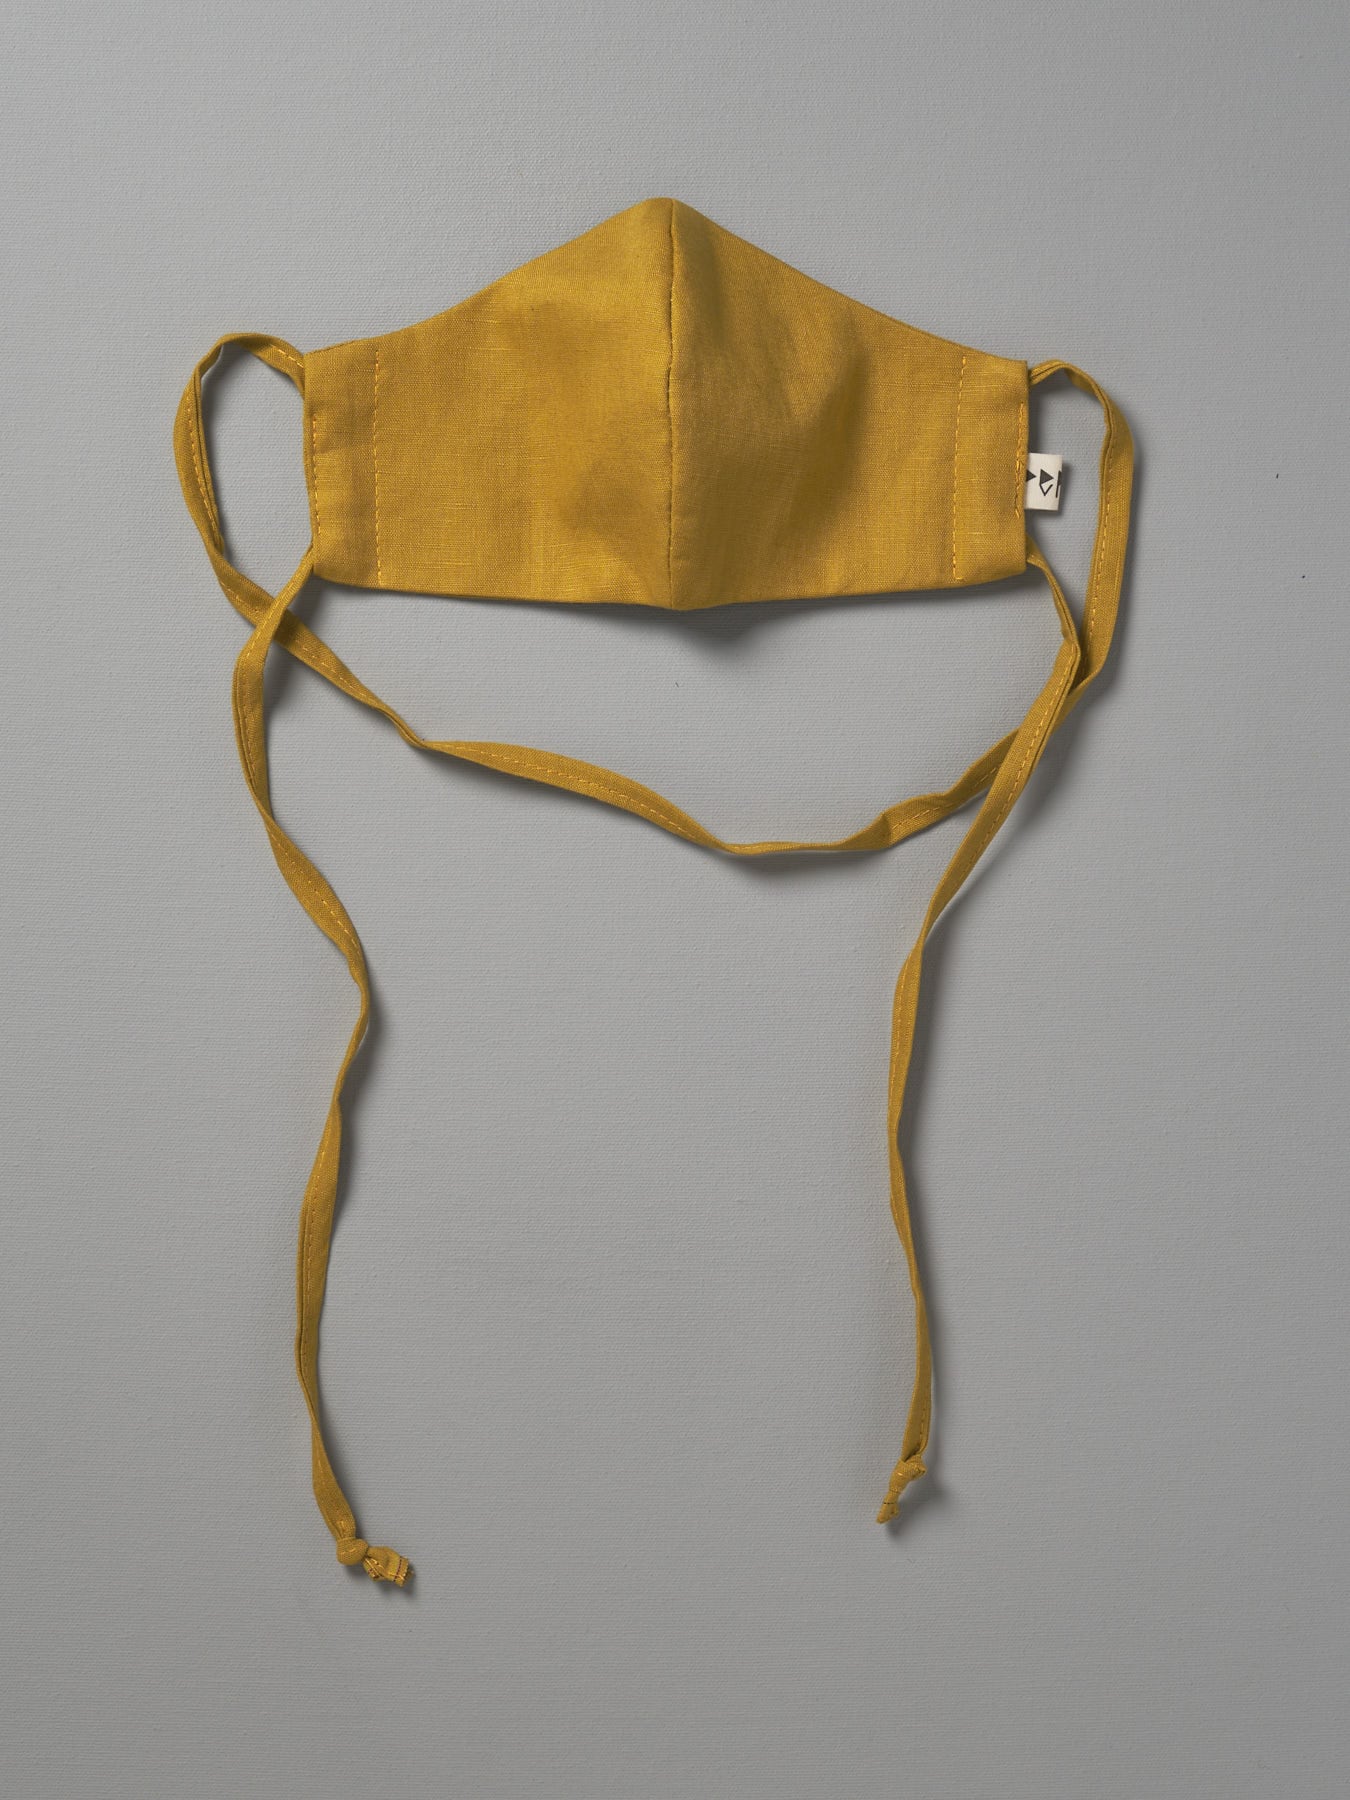 A Linen Face Mask - Citrus by Peppin hanging on a gray background.